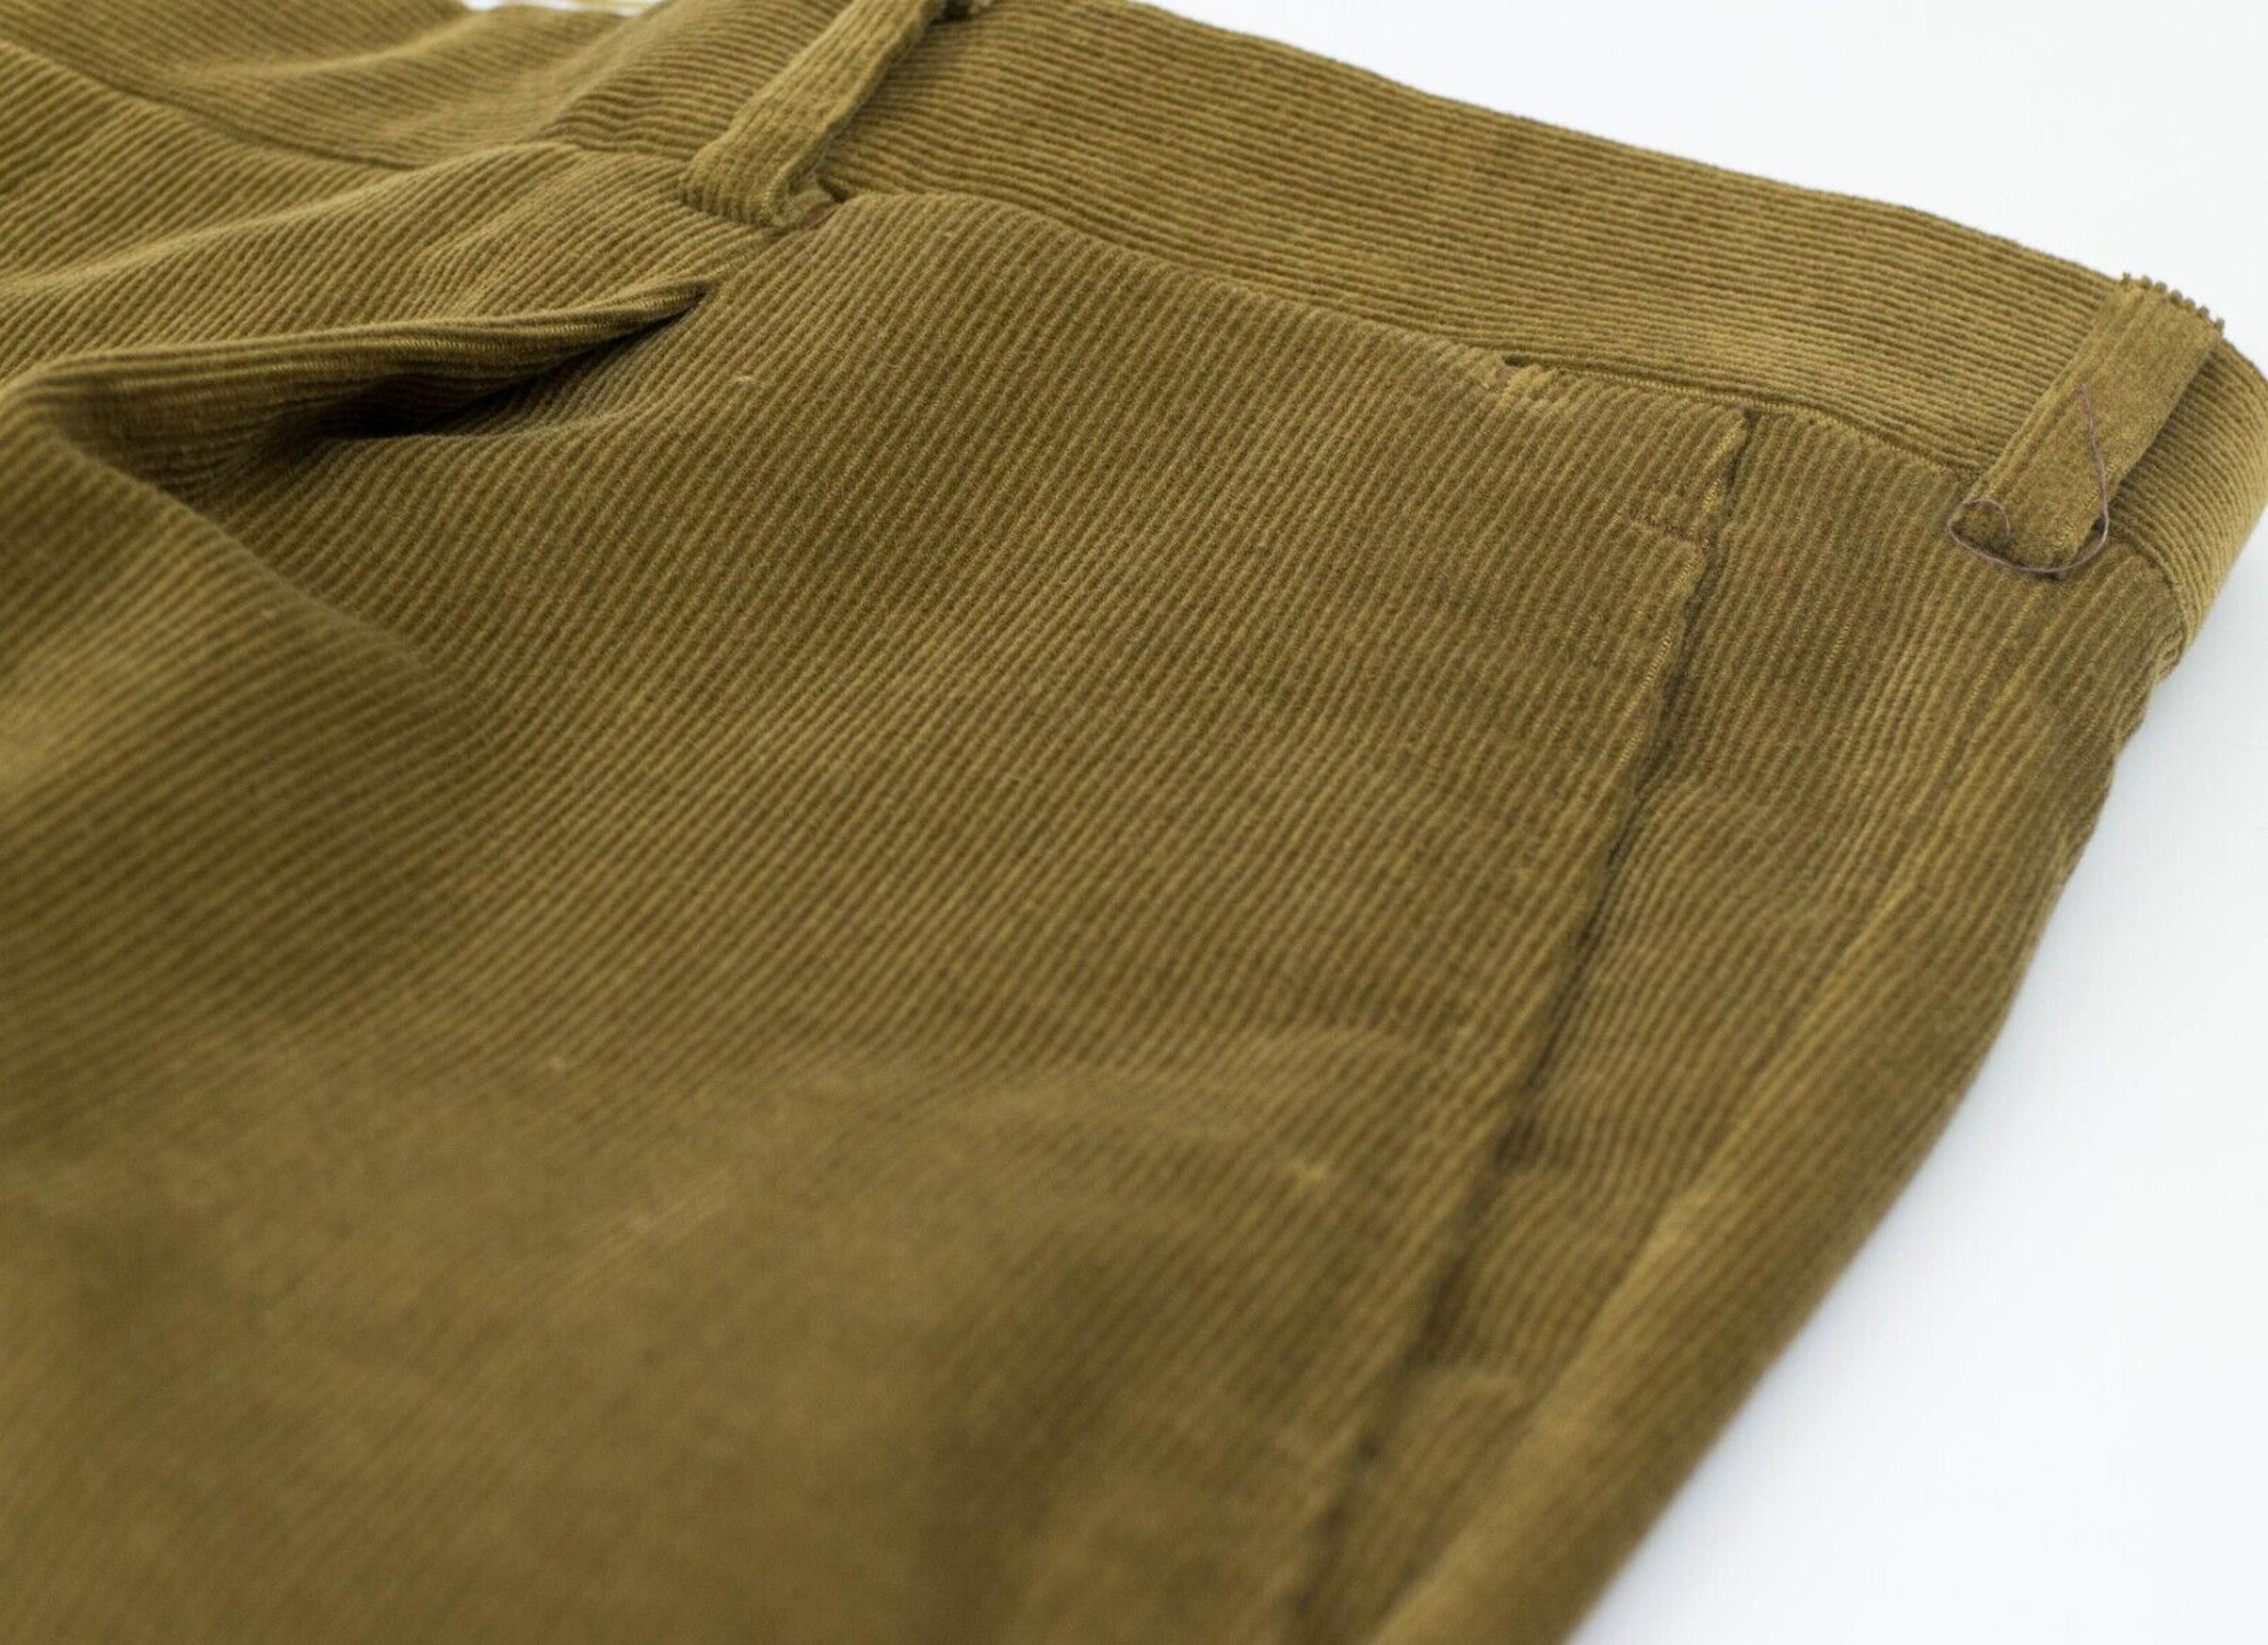 Alternate View 8 of Brown Cotton Blend Corduroy Casual Pants